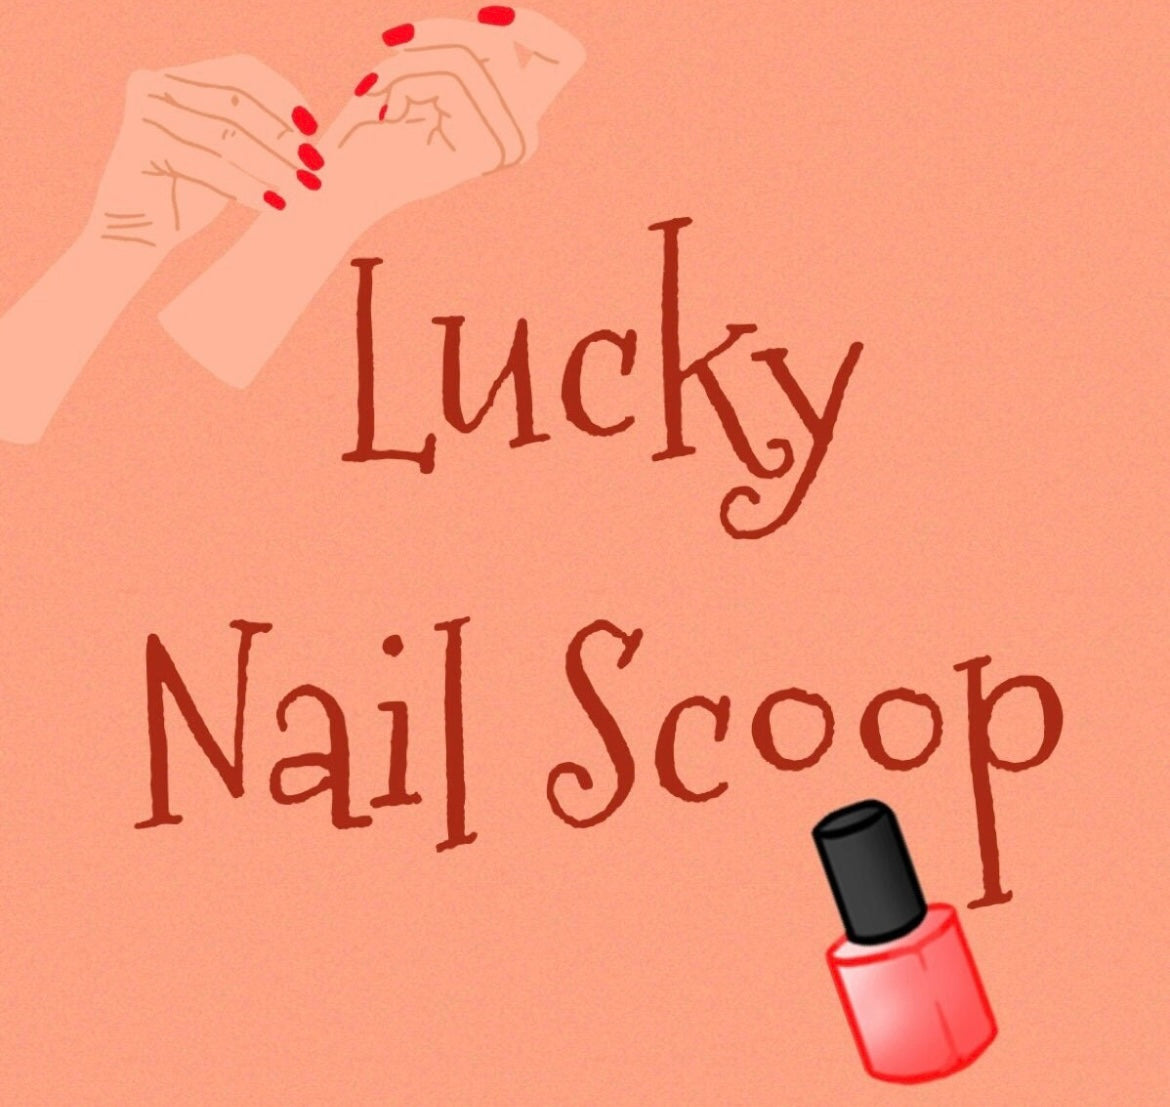 Lucky Nail Scoop